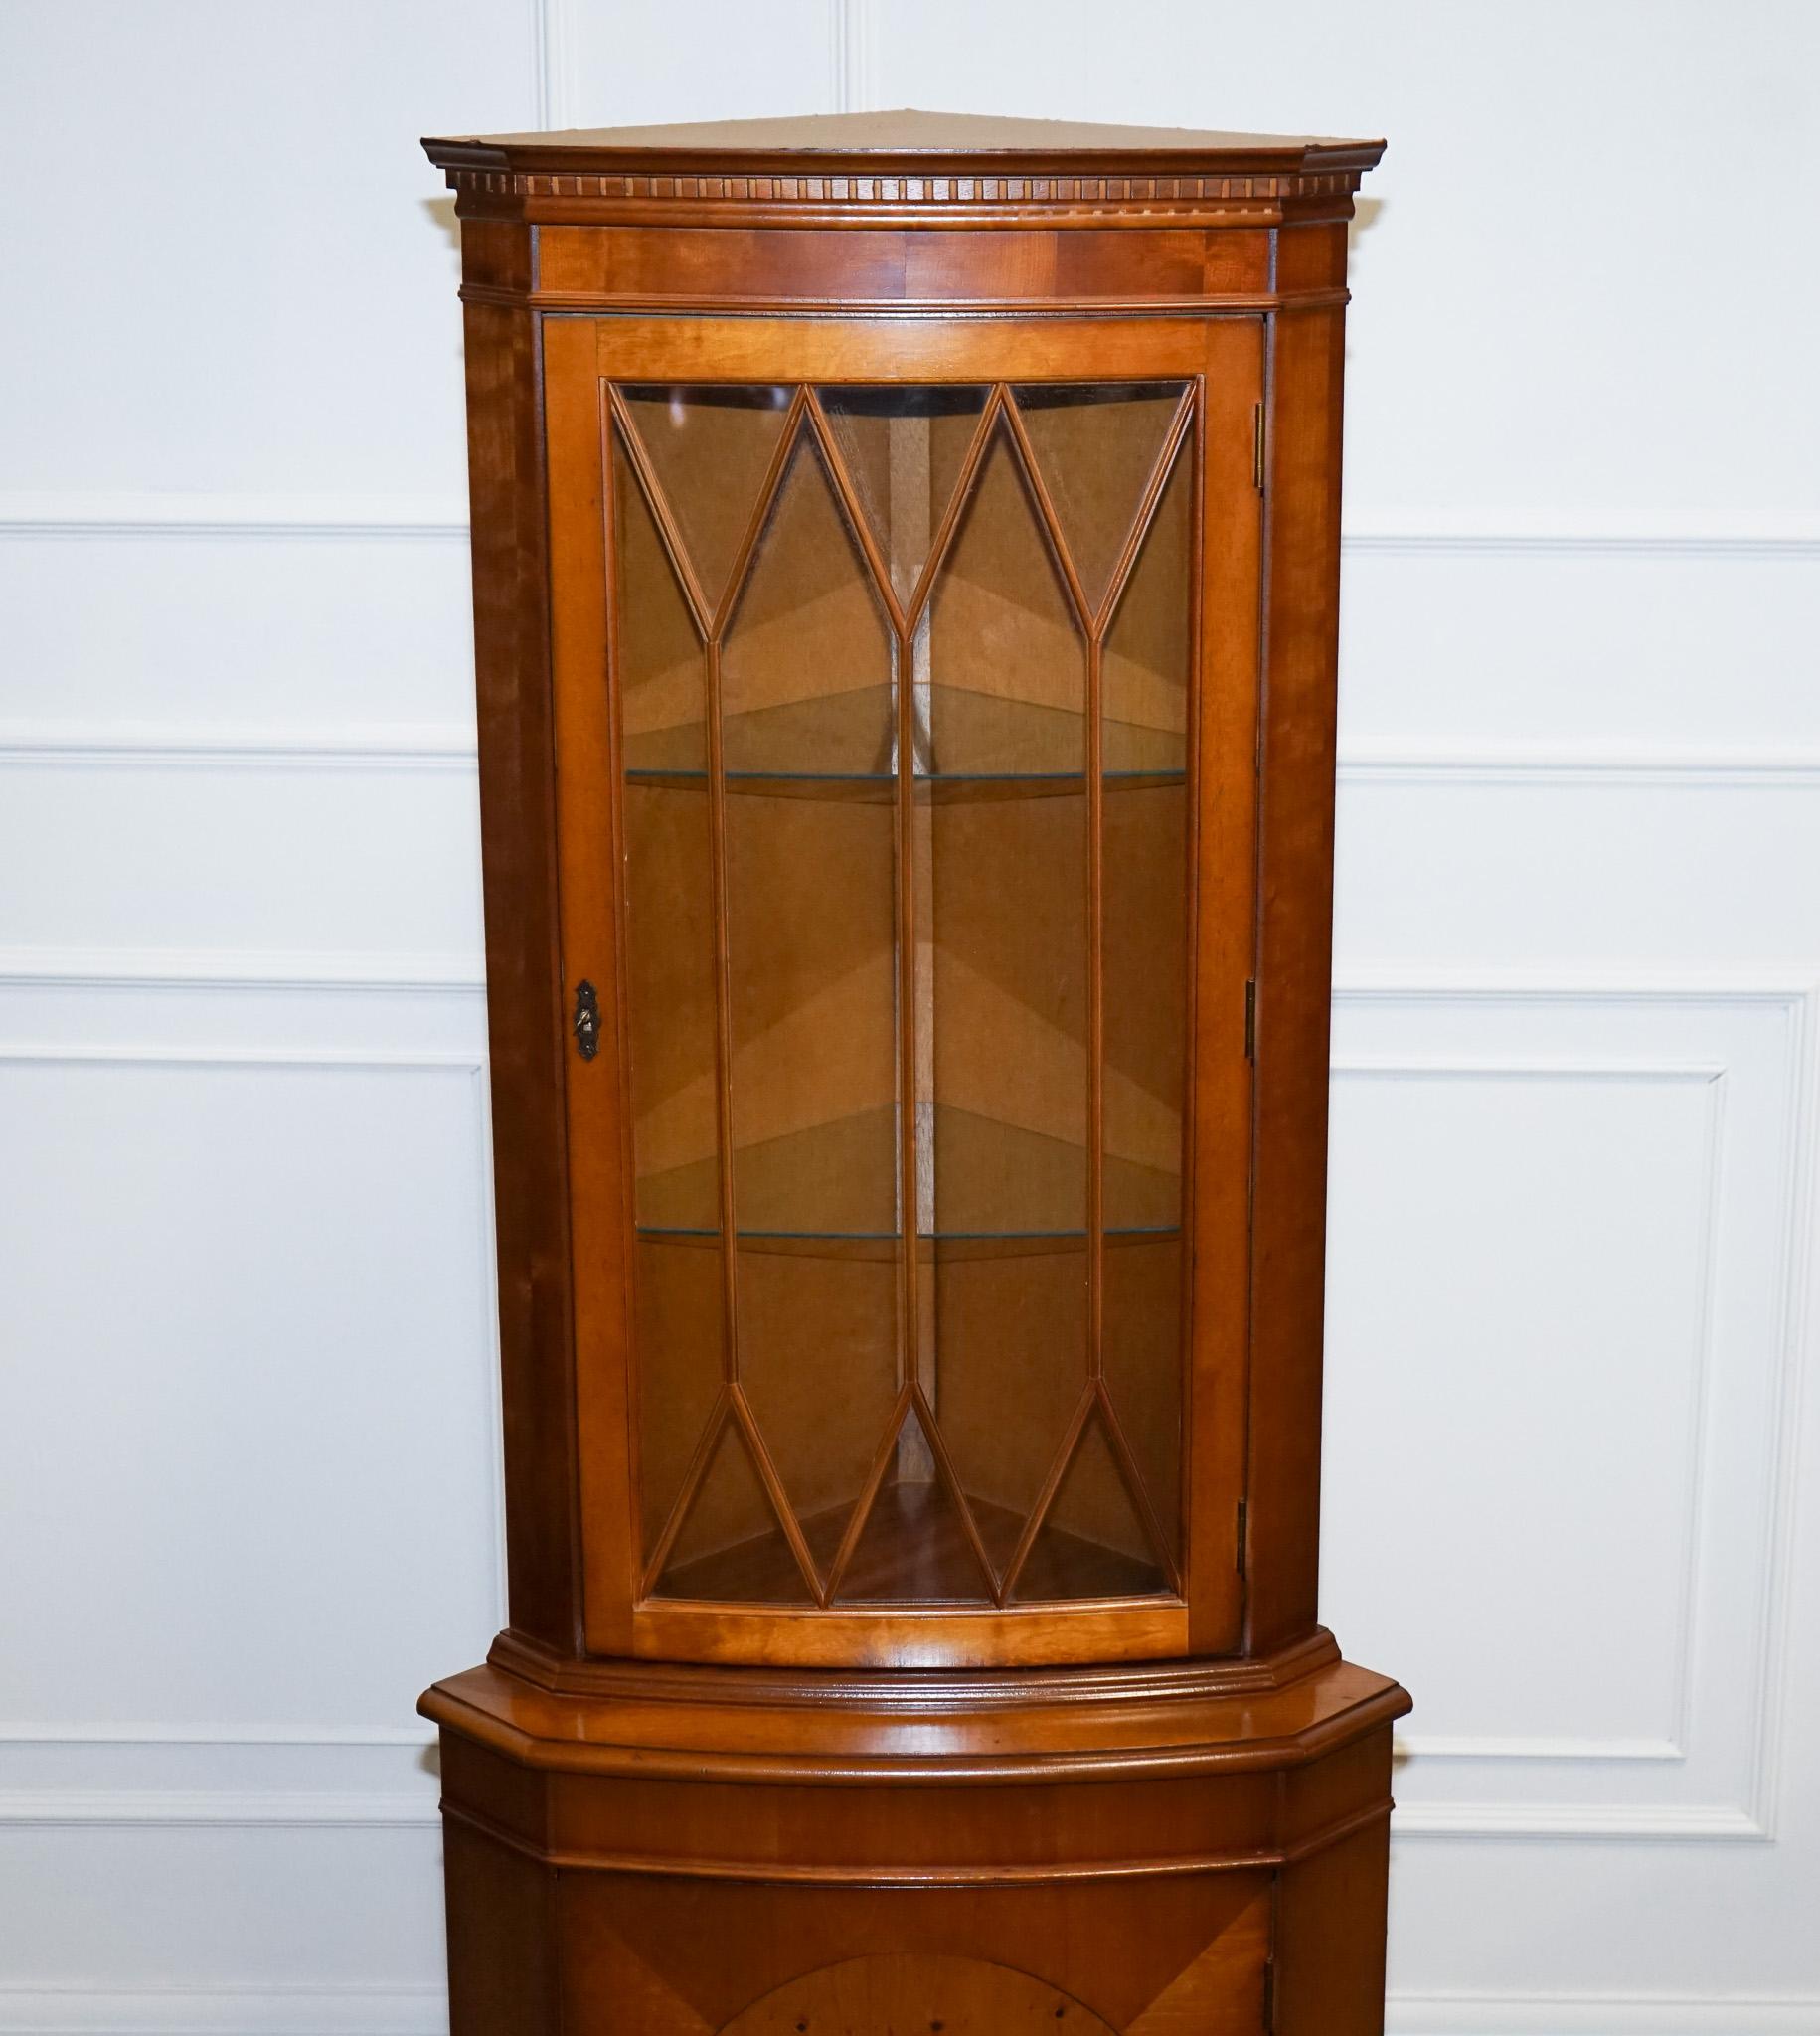 
We are delighted to offer for sale this Beautiful Burr Yew Wood Corner Cabinet.

This burr yew wood corner display cabinet is a stunning and elegant piece of furniture that boasts both functionality and style. With its unique shape, it perfectly